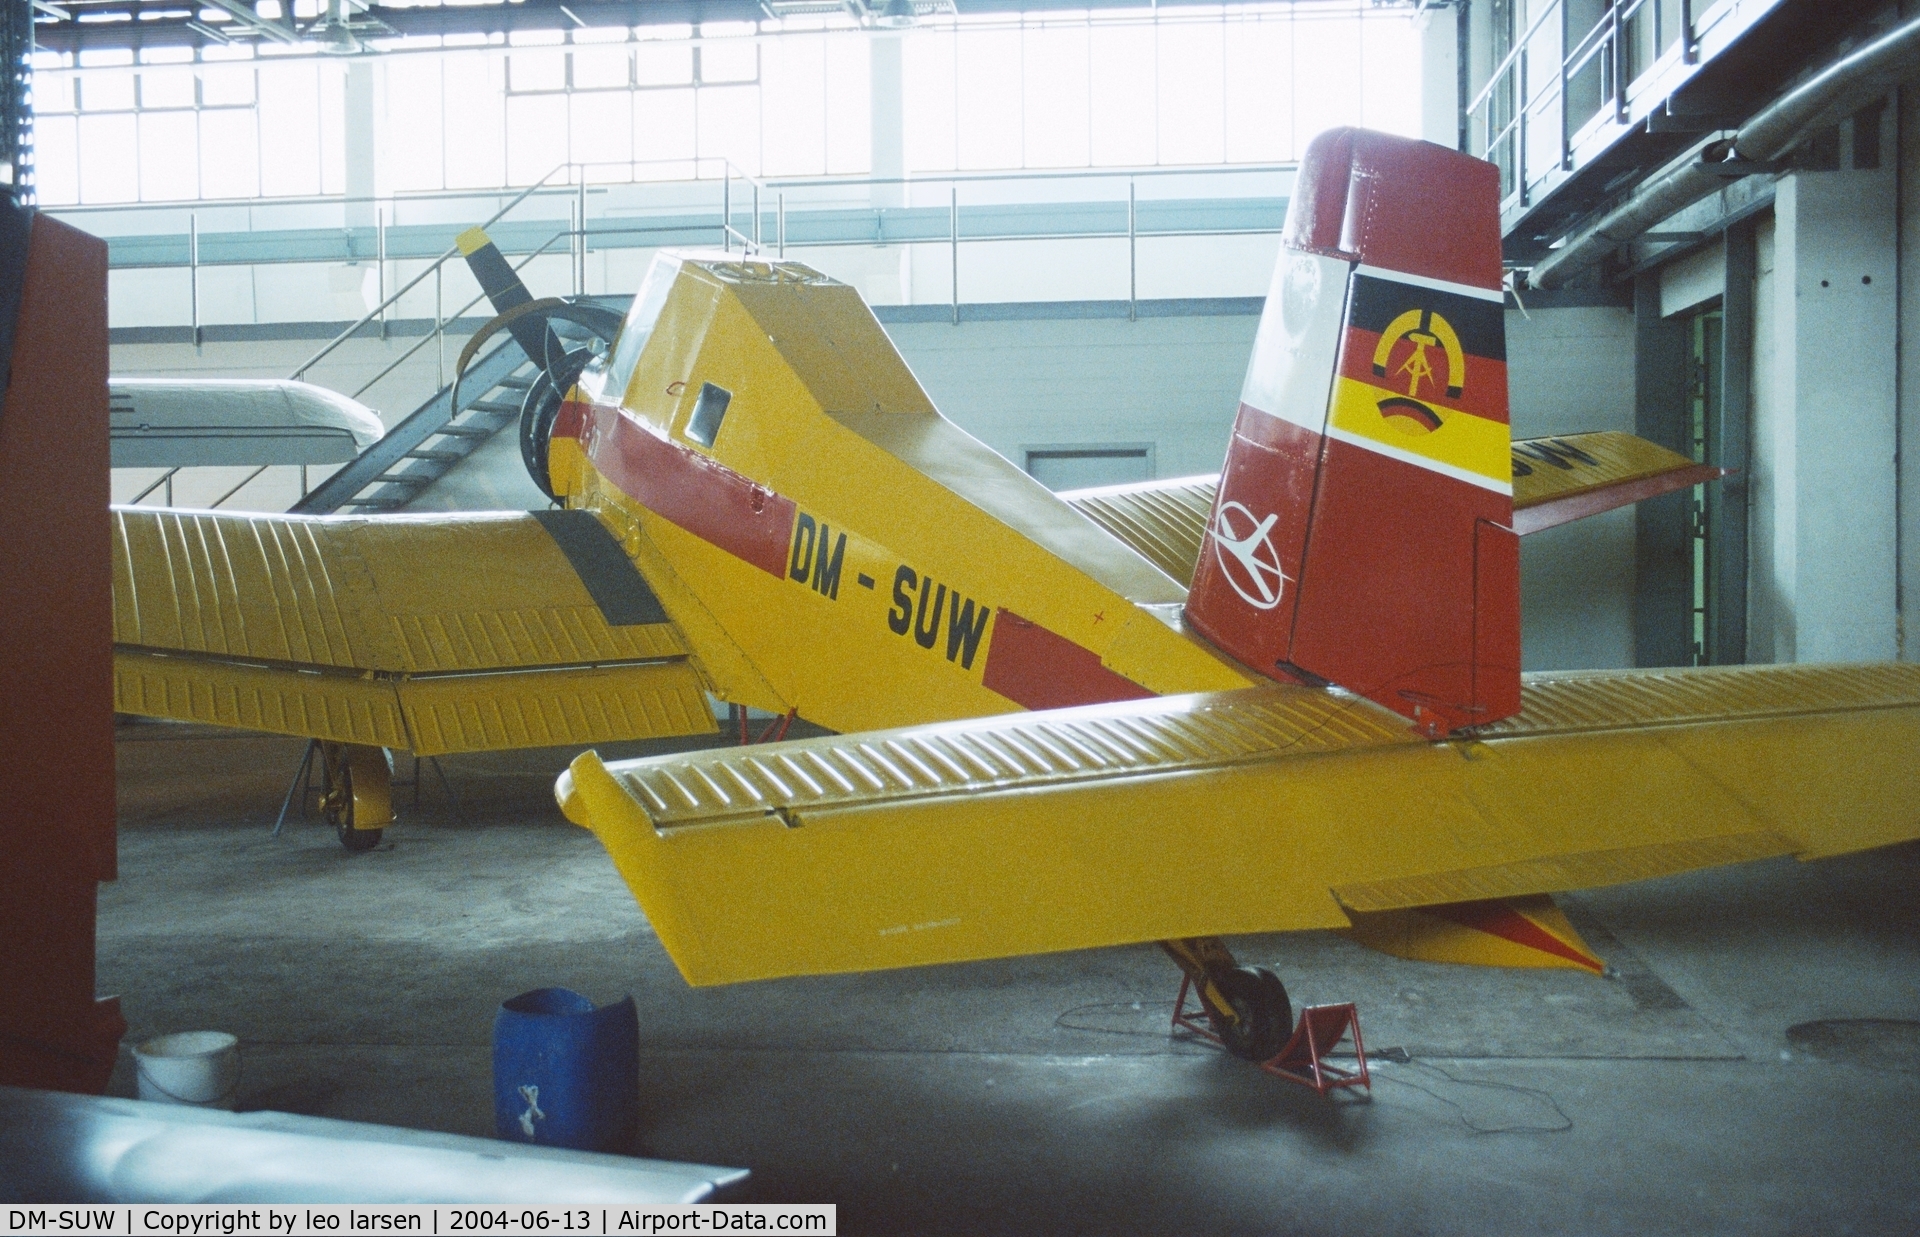 DM-SUW, 1974 Zlin Z-37A Cmelak C/N 19-20, Wernigerode Museum13.6.2004.Aircradt from 1974 with c/n 19-20 and not 29-20.